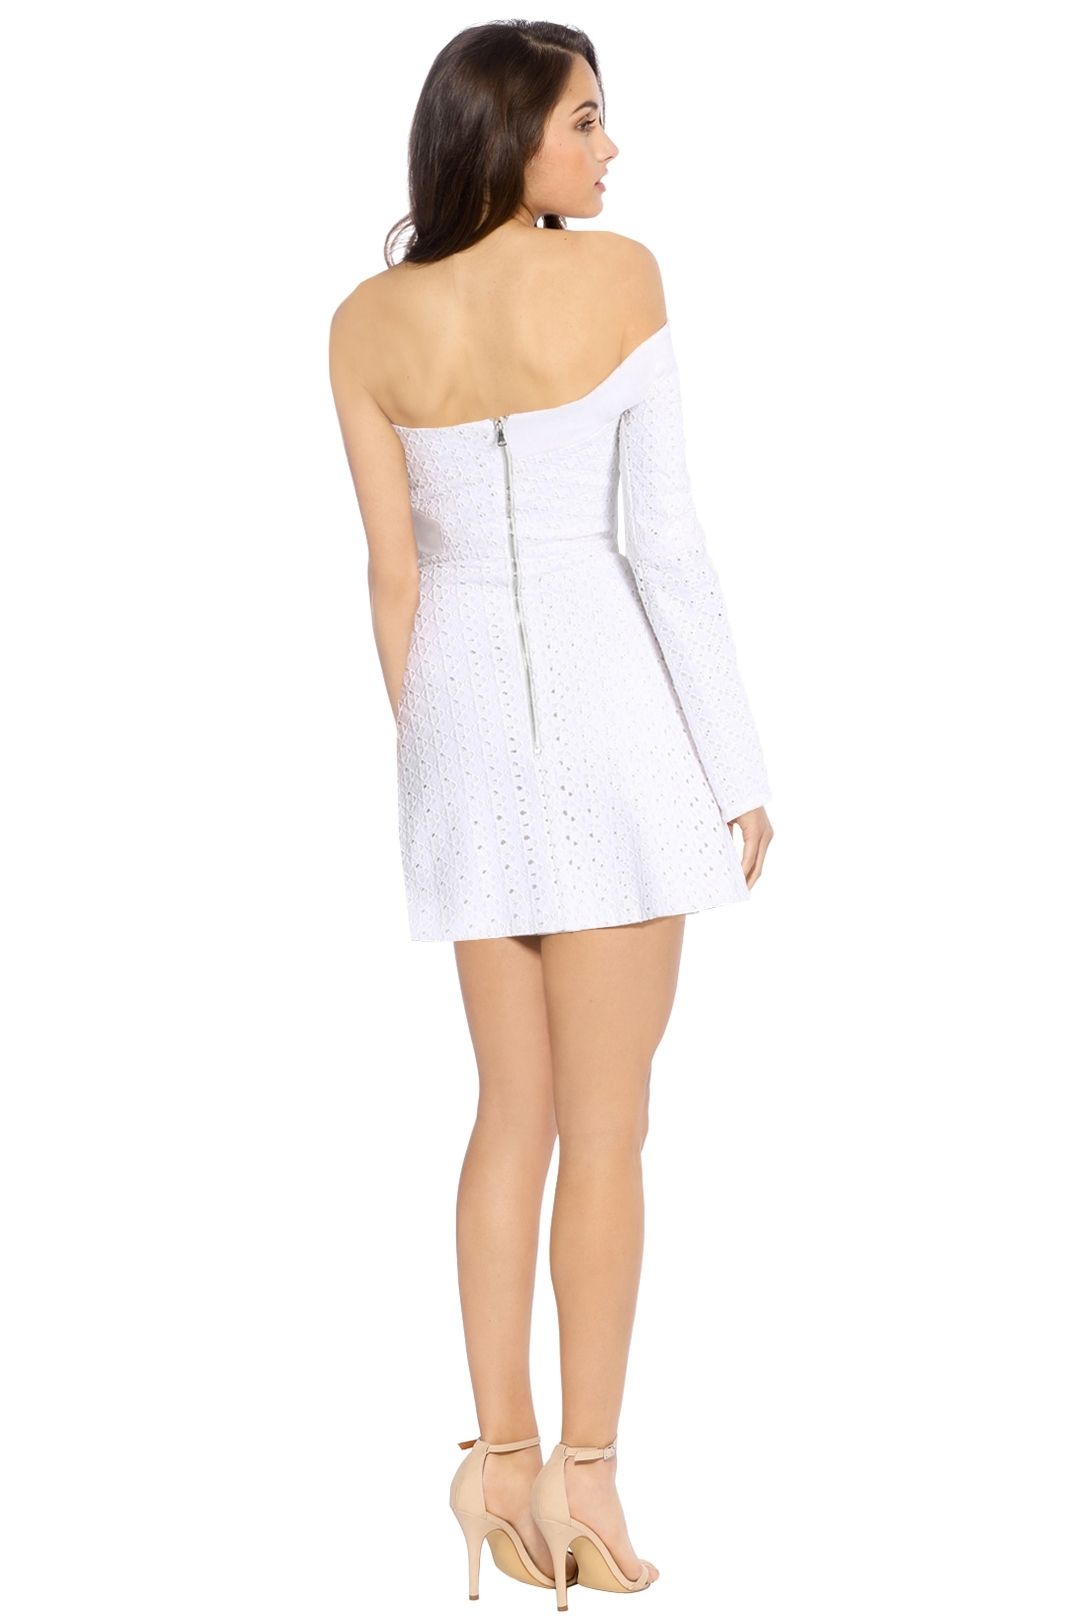 By Johnny - One Sleeve Lace Marthe Mini Dress - White - Back